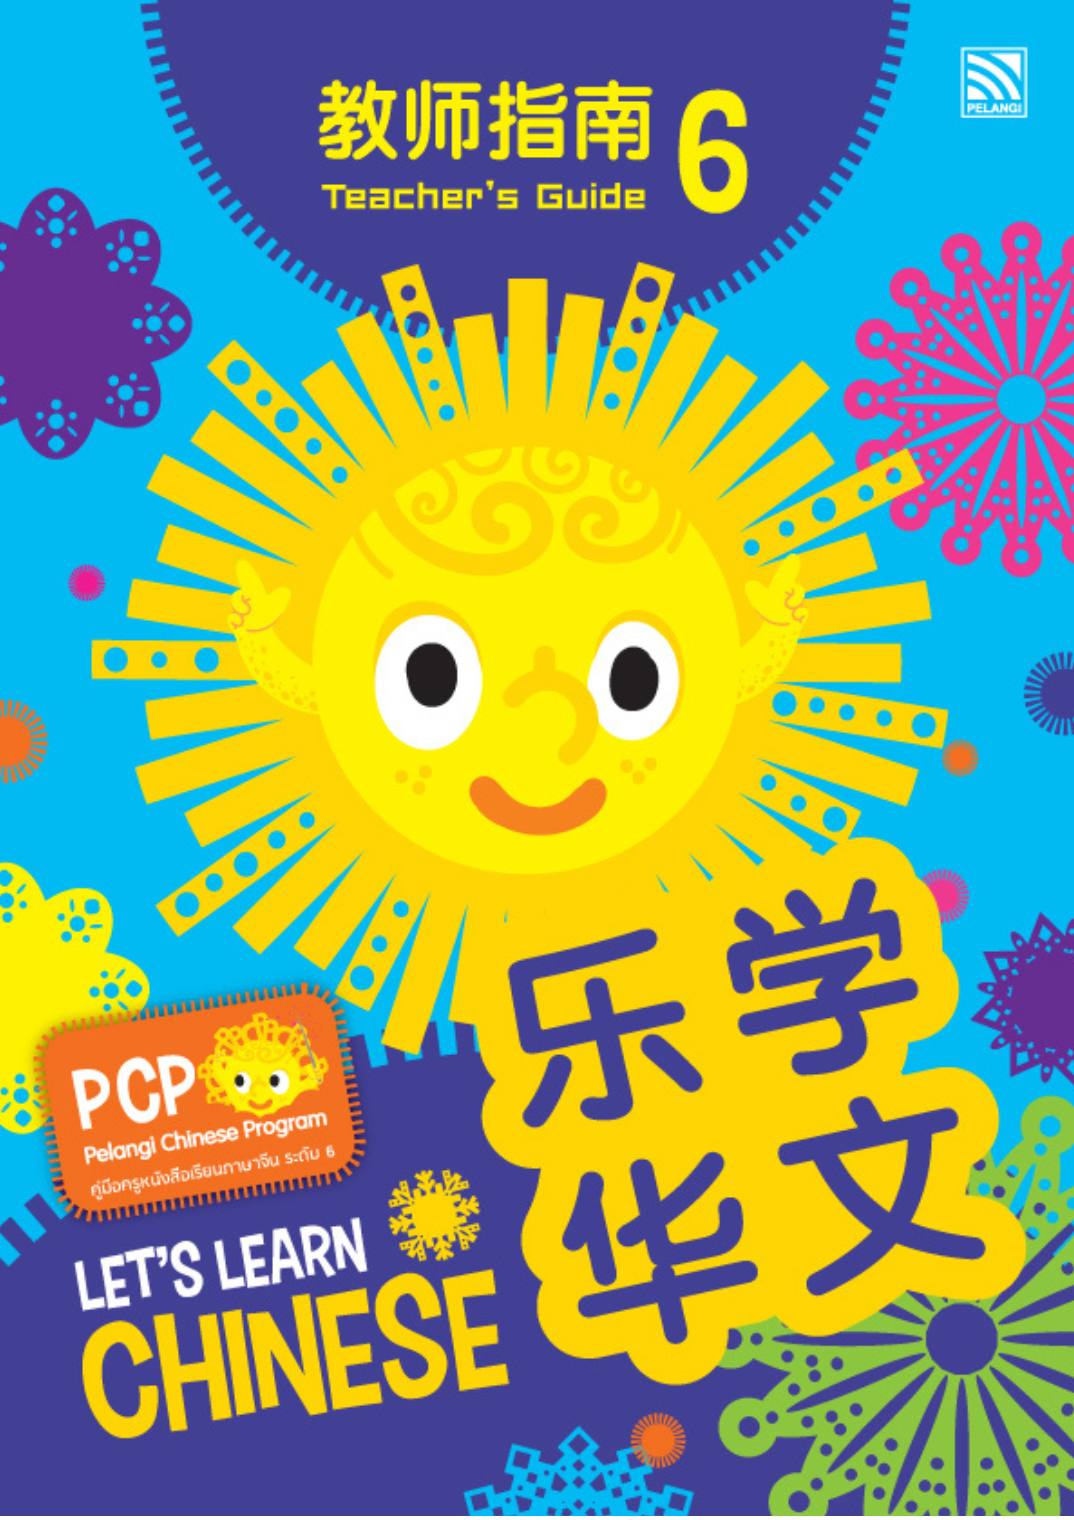 Let's Learn Chinese P6 Teacher Guide